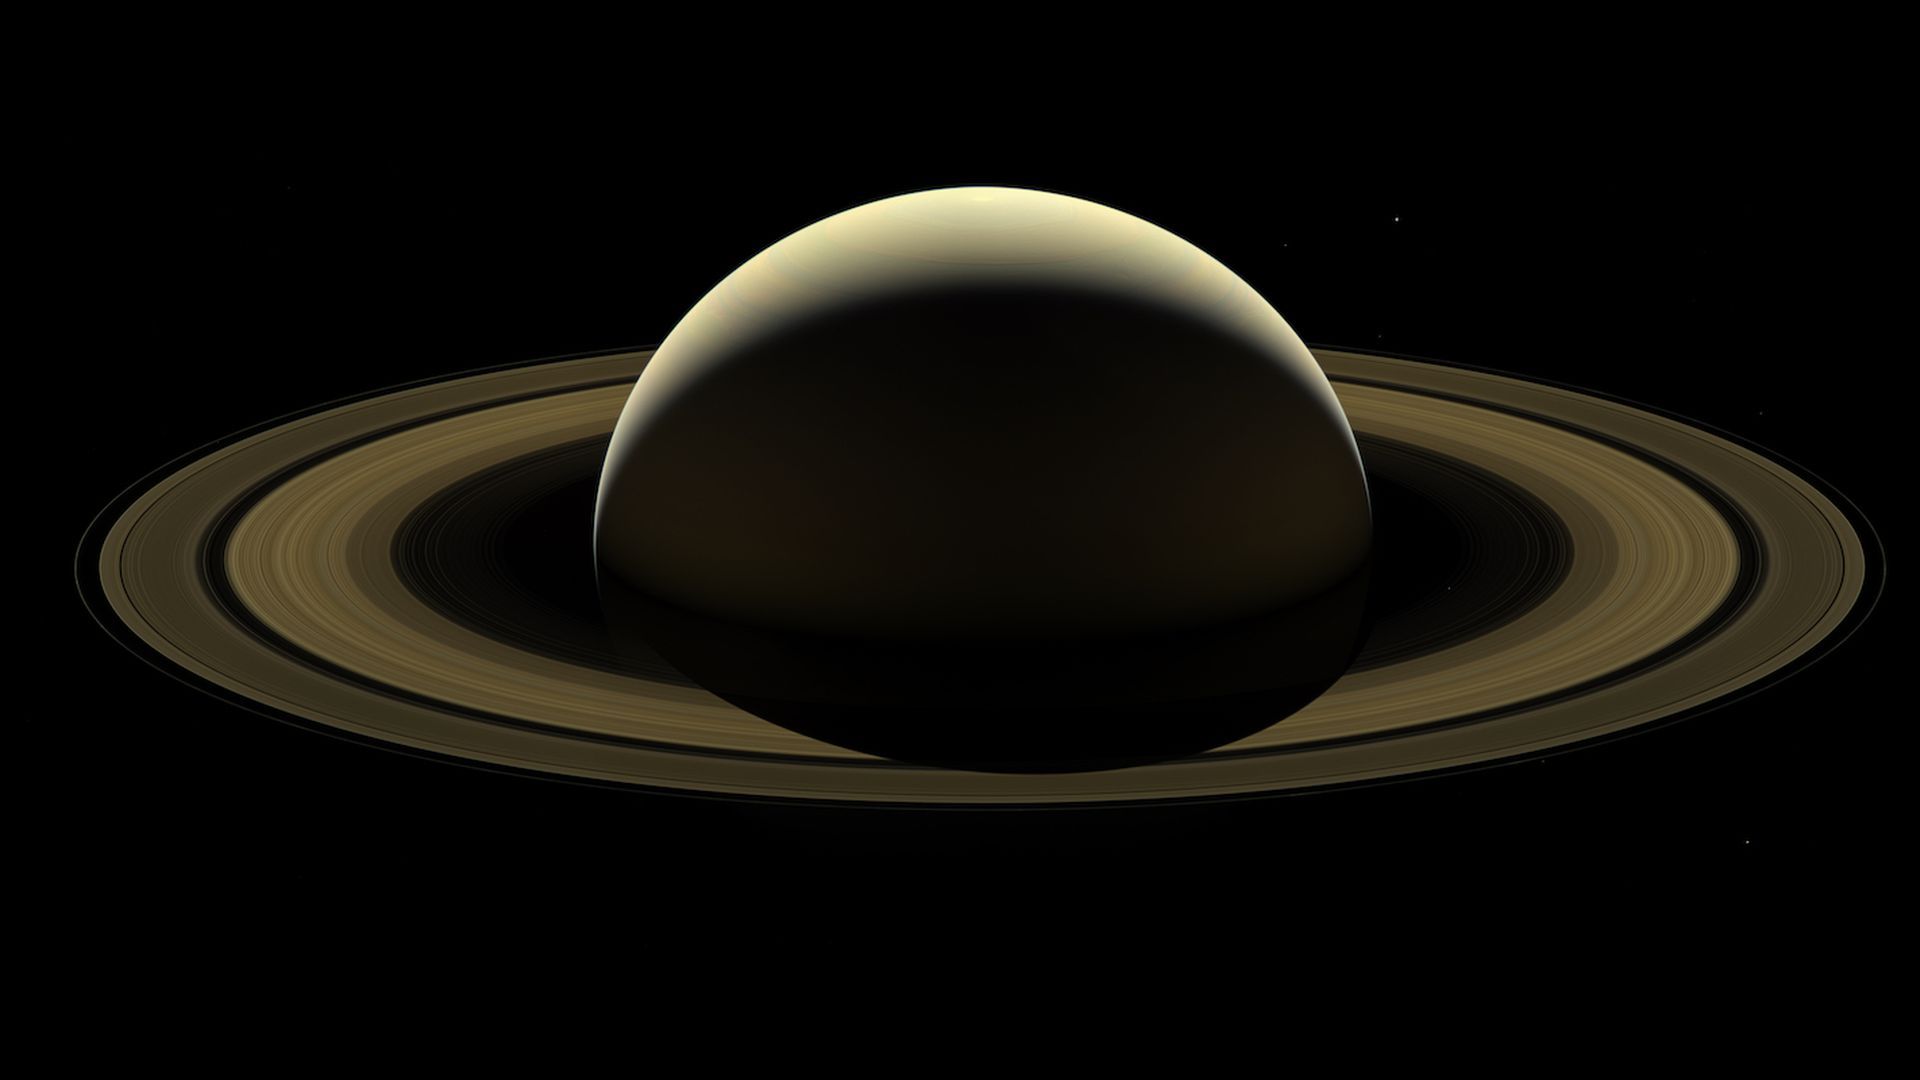 Saturn as seen by Cassini in 2017.